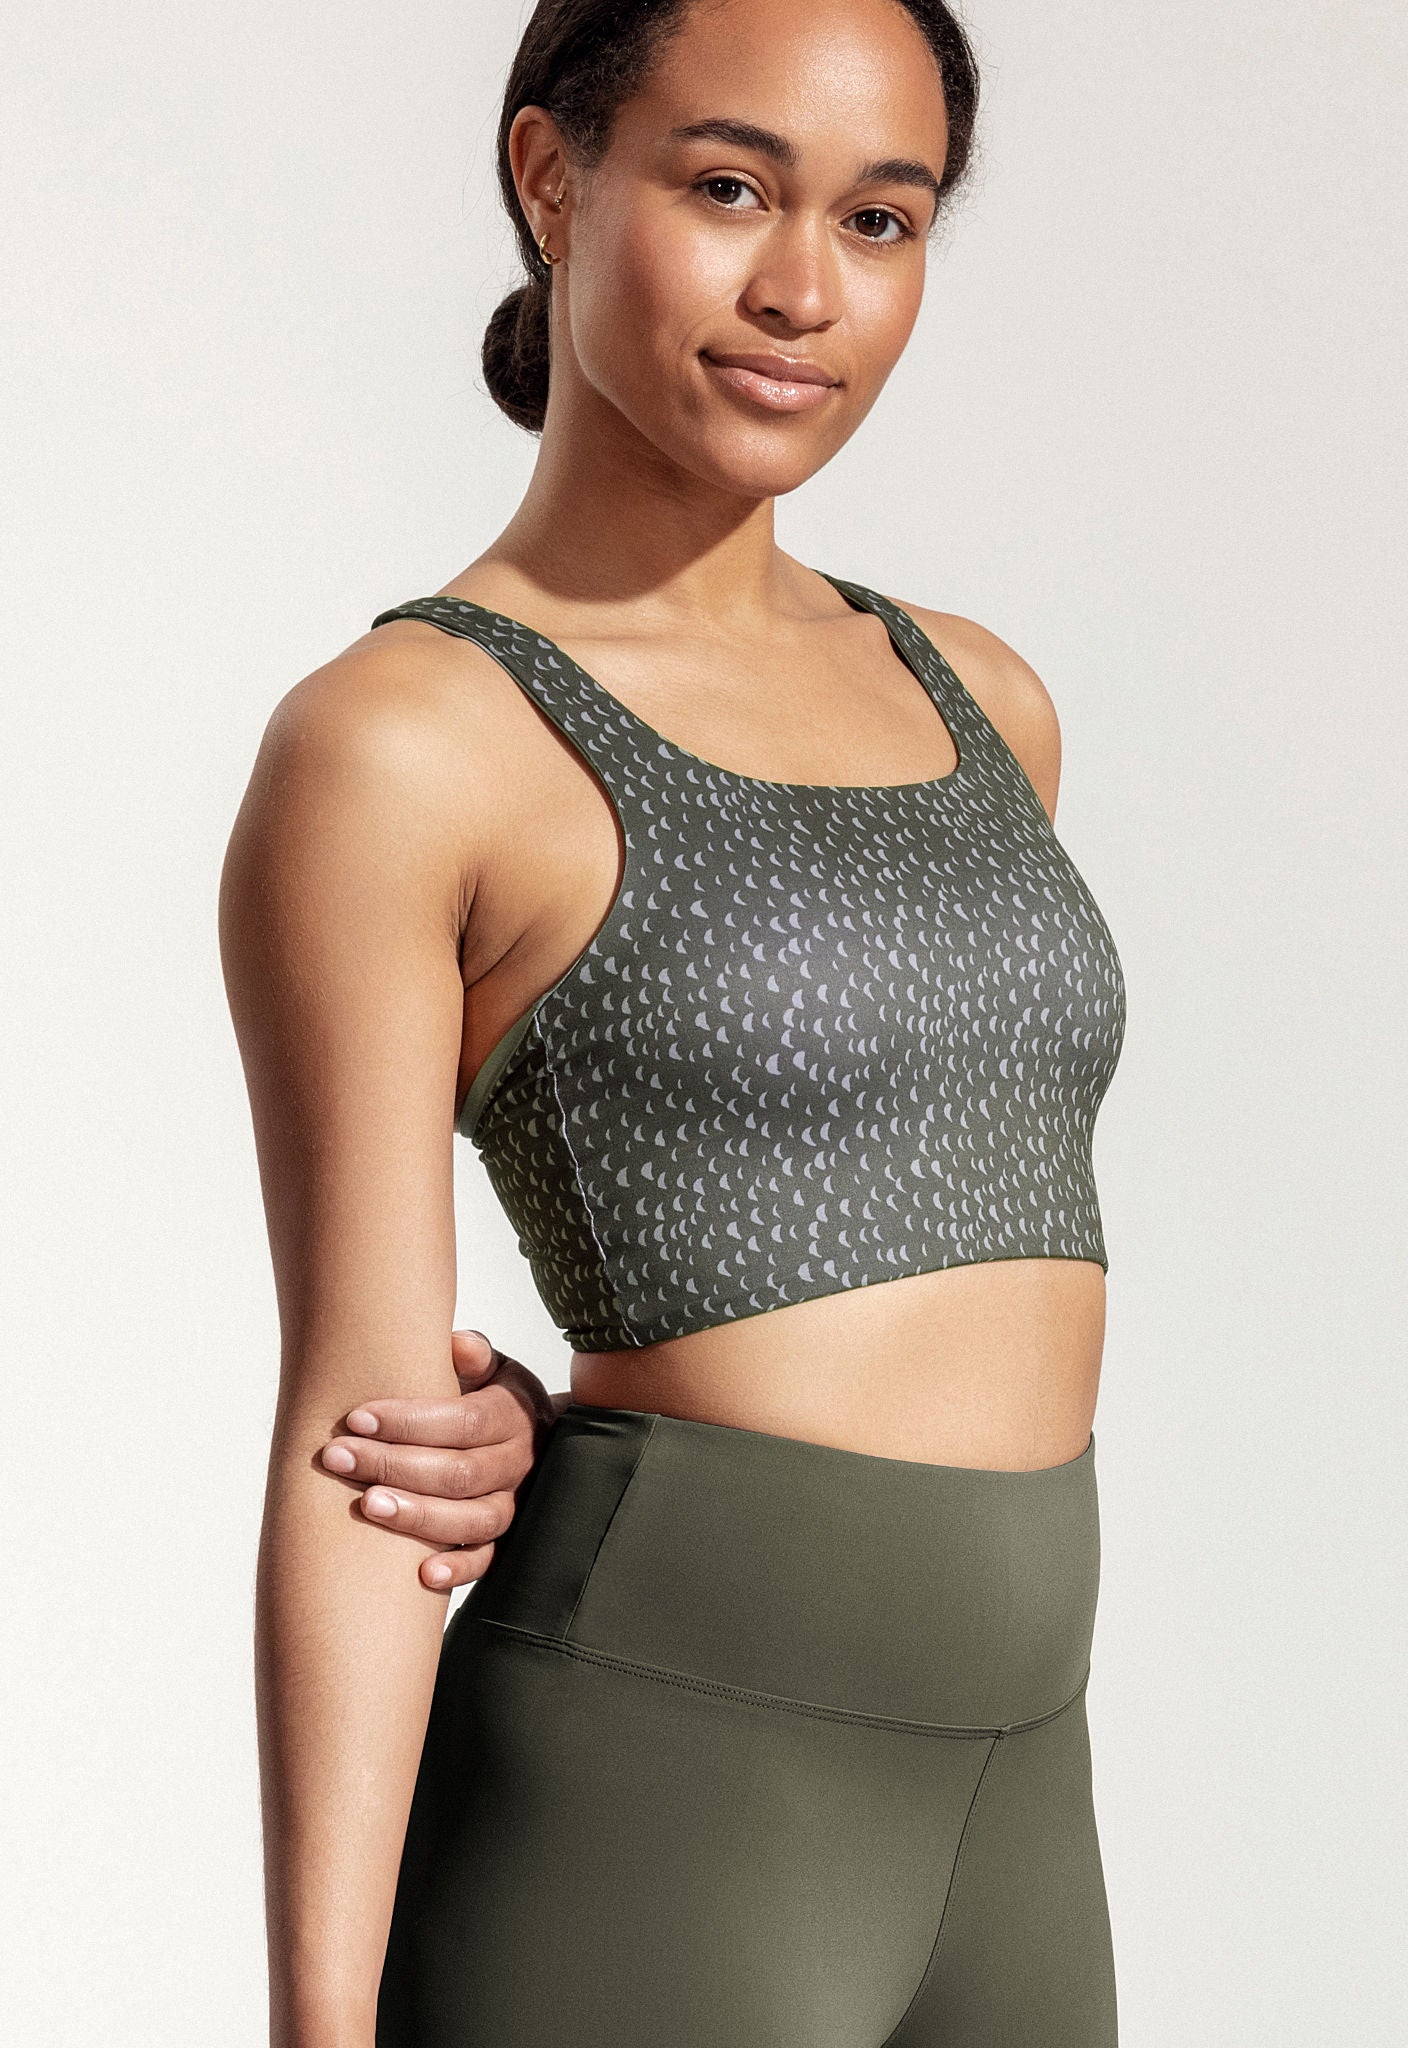 Yoga Top "Mica" with Green Moon